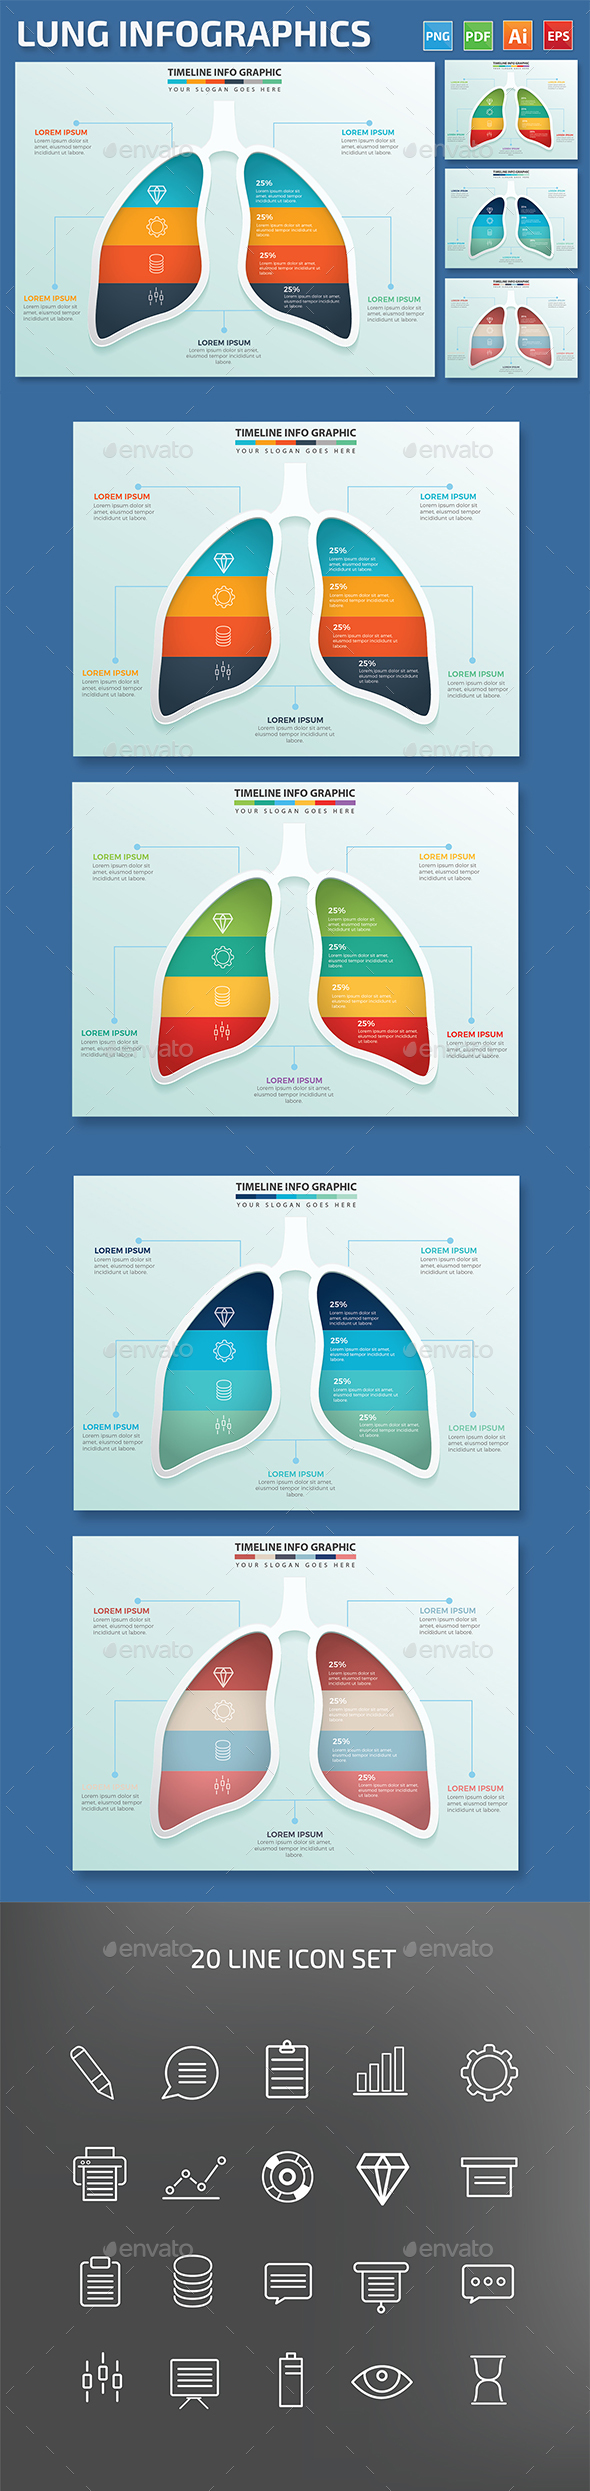 Lung Infographics design